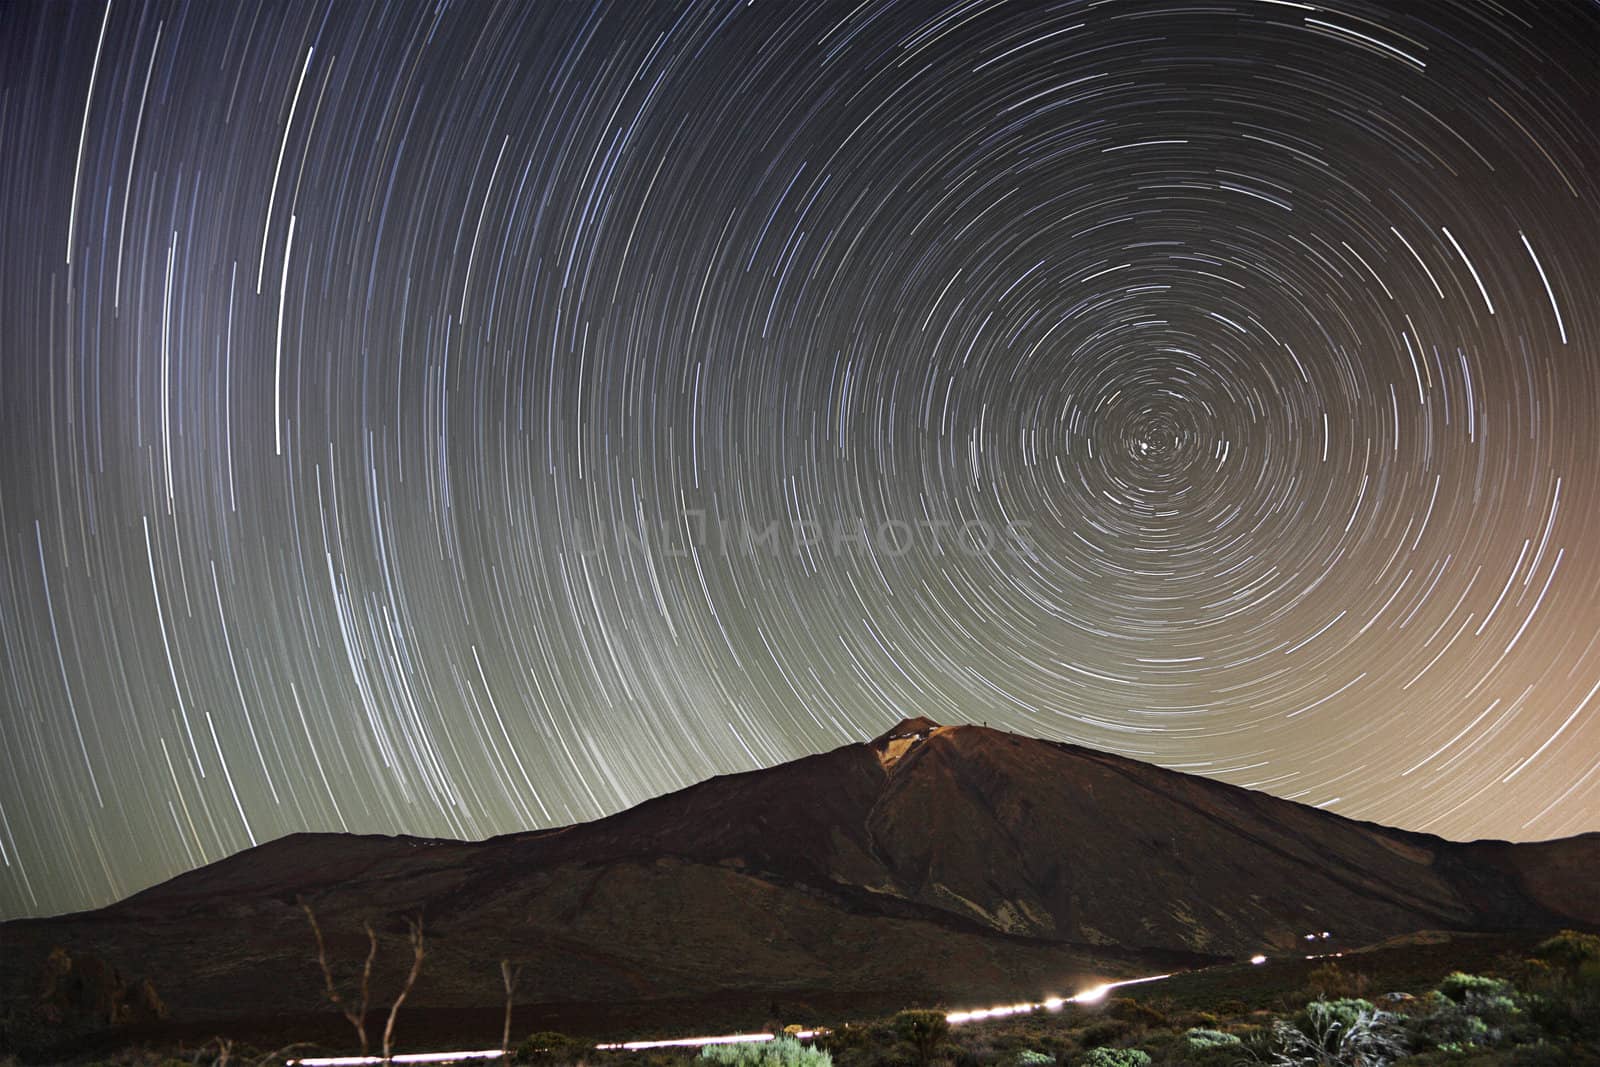 Stars. Star trail night sky on Teide, Tenerife. 65 min long exposure of a remarkable star clear night sky with Teide in the scene. Early Spring.